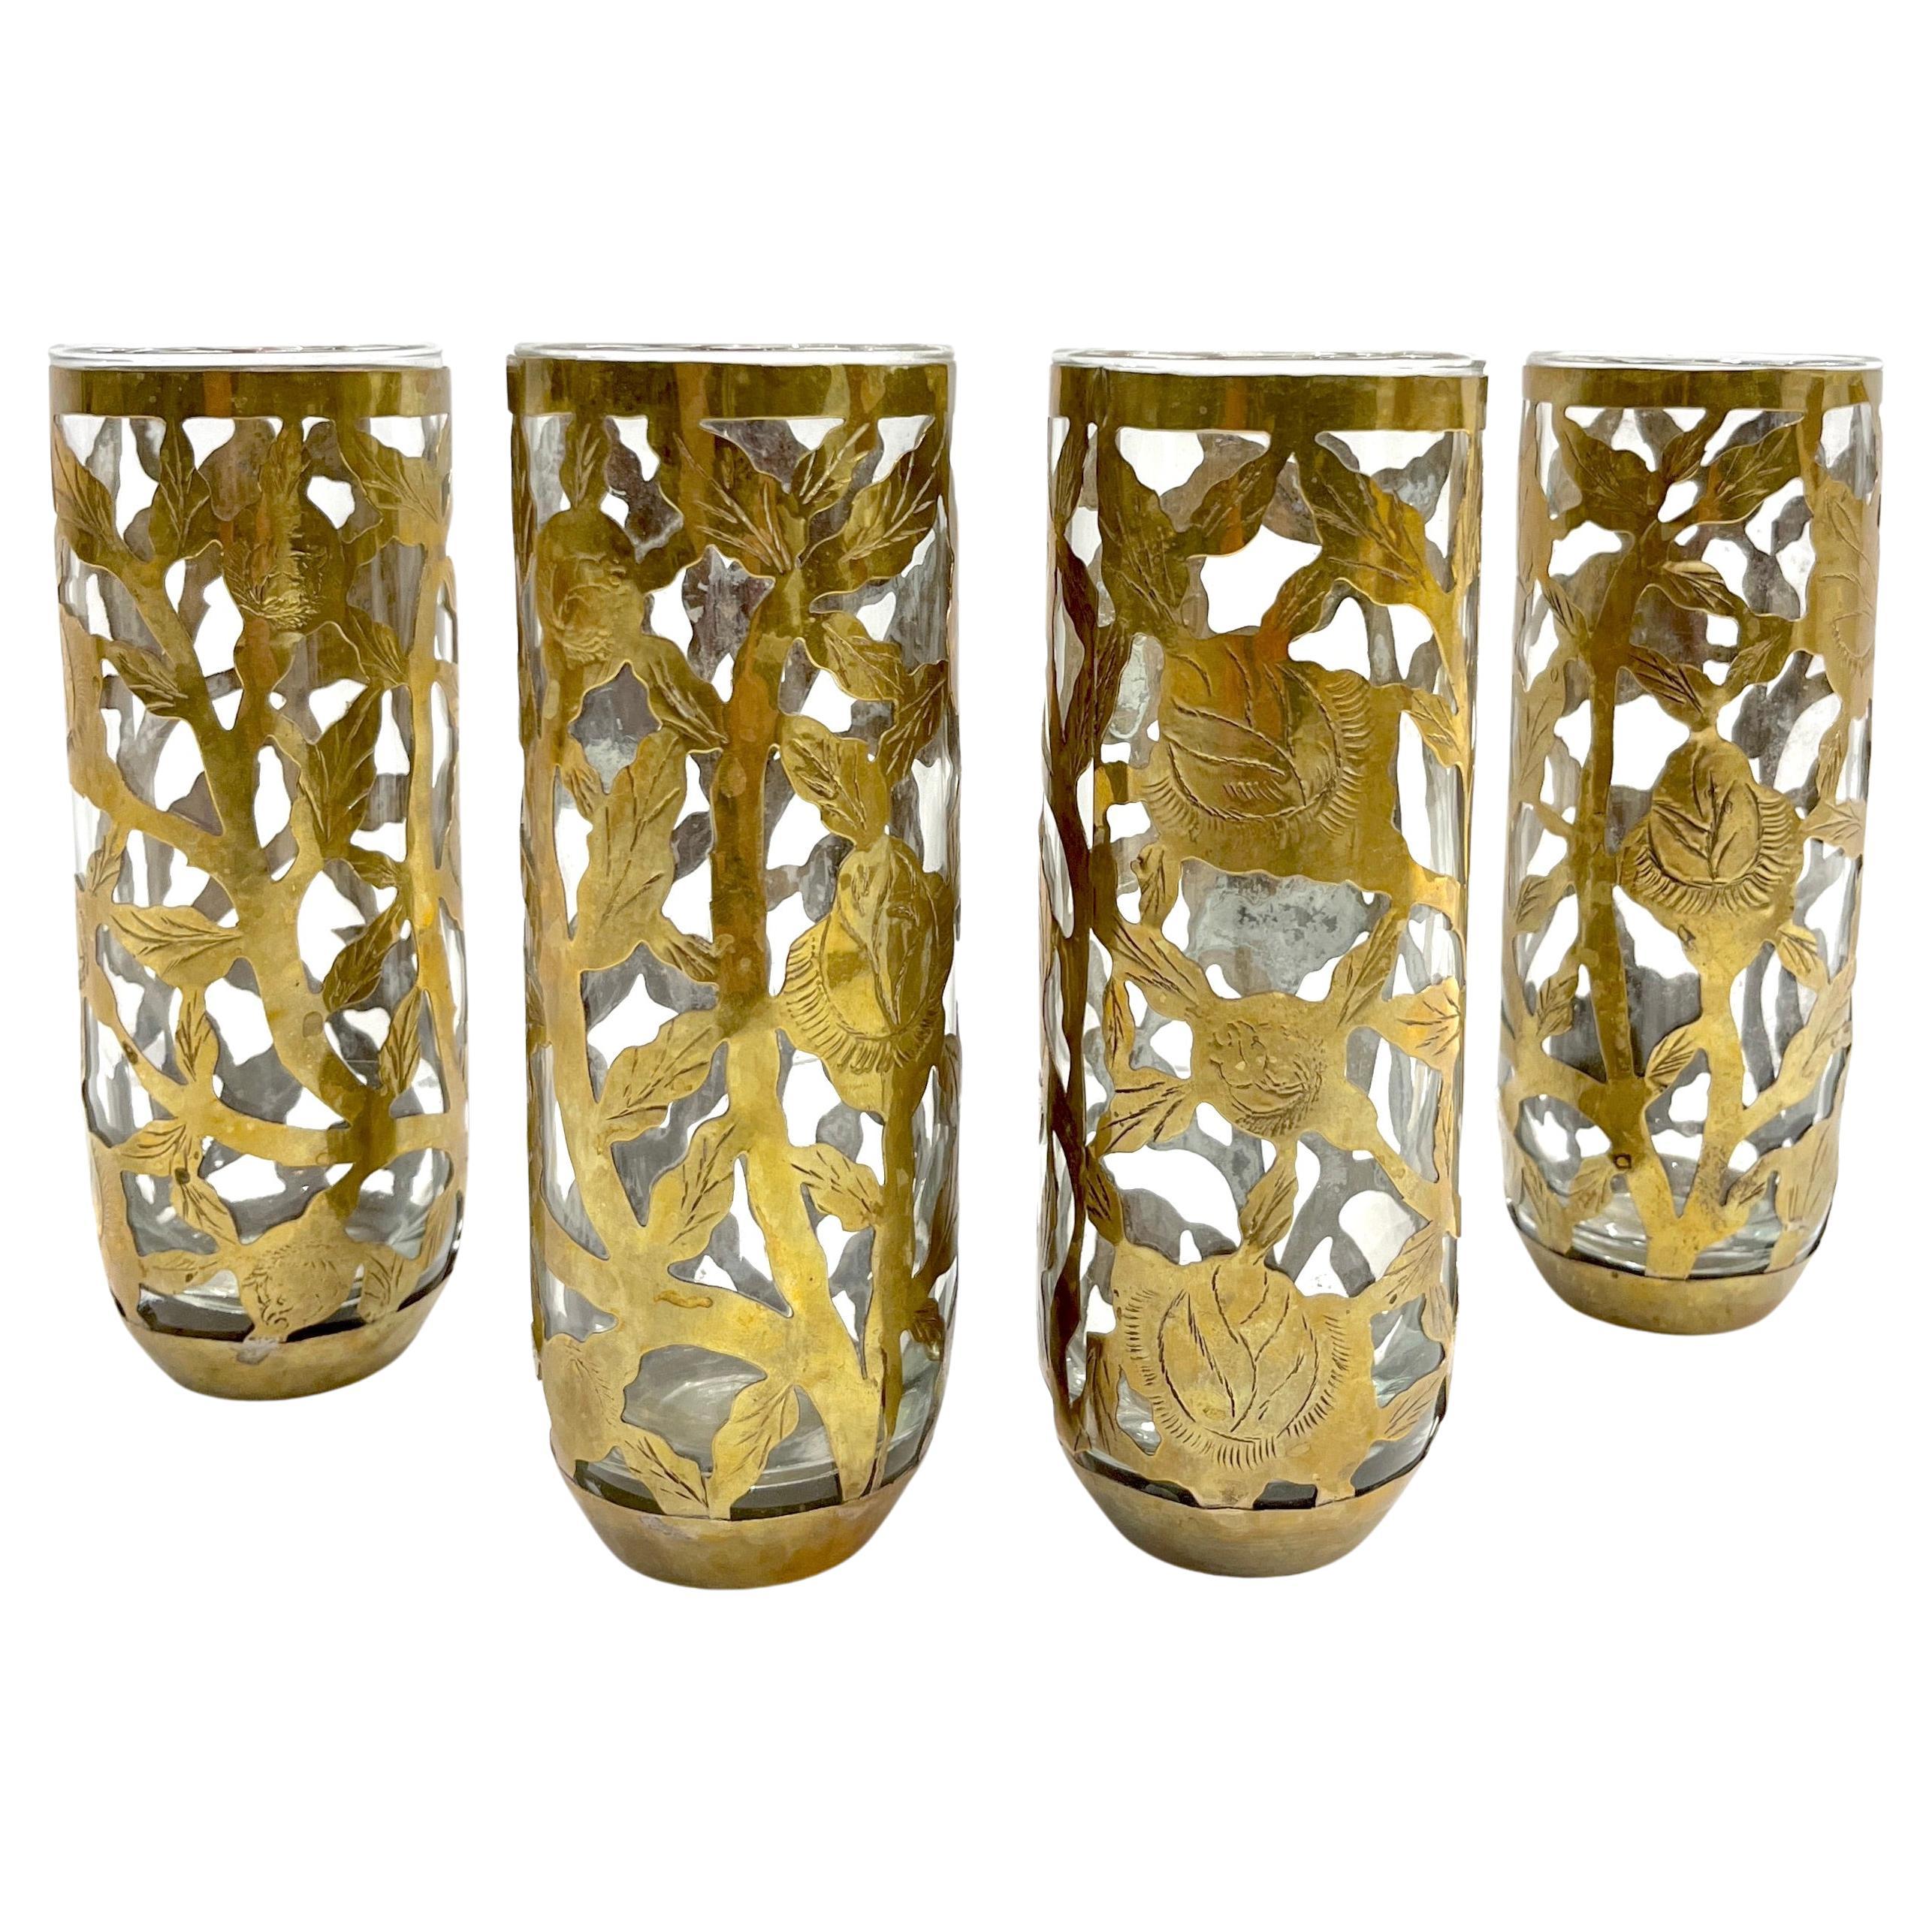 1960 Mexican Set 4 Drinking Glasses Encased in Etched Cutwork Floral Brass Decor For Sale